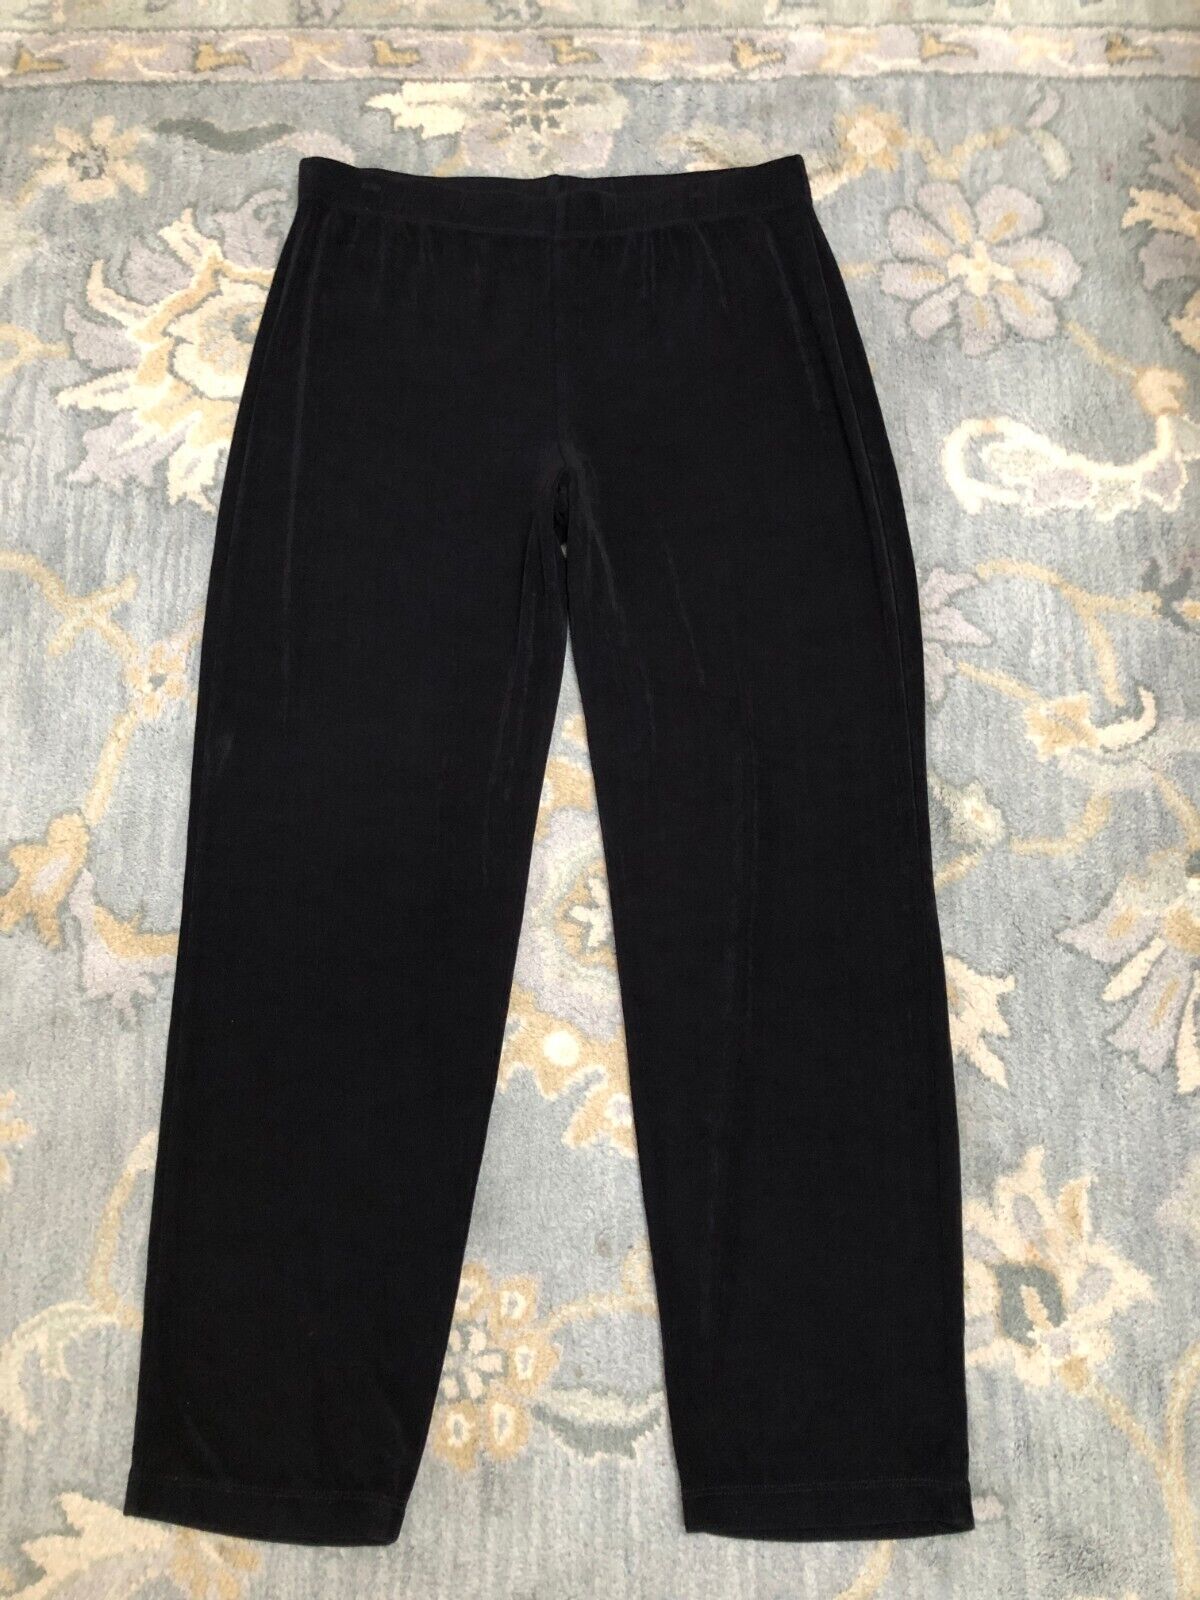 Chicos Travelers Black Slinky Pull On Pants Womens Size 2 R = Large - Helia  Beer Co